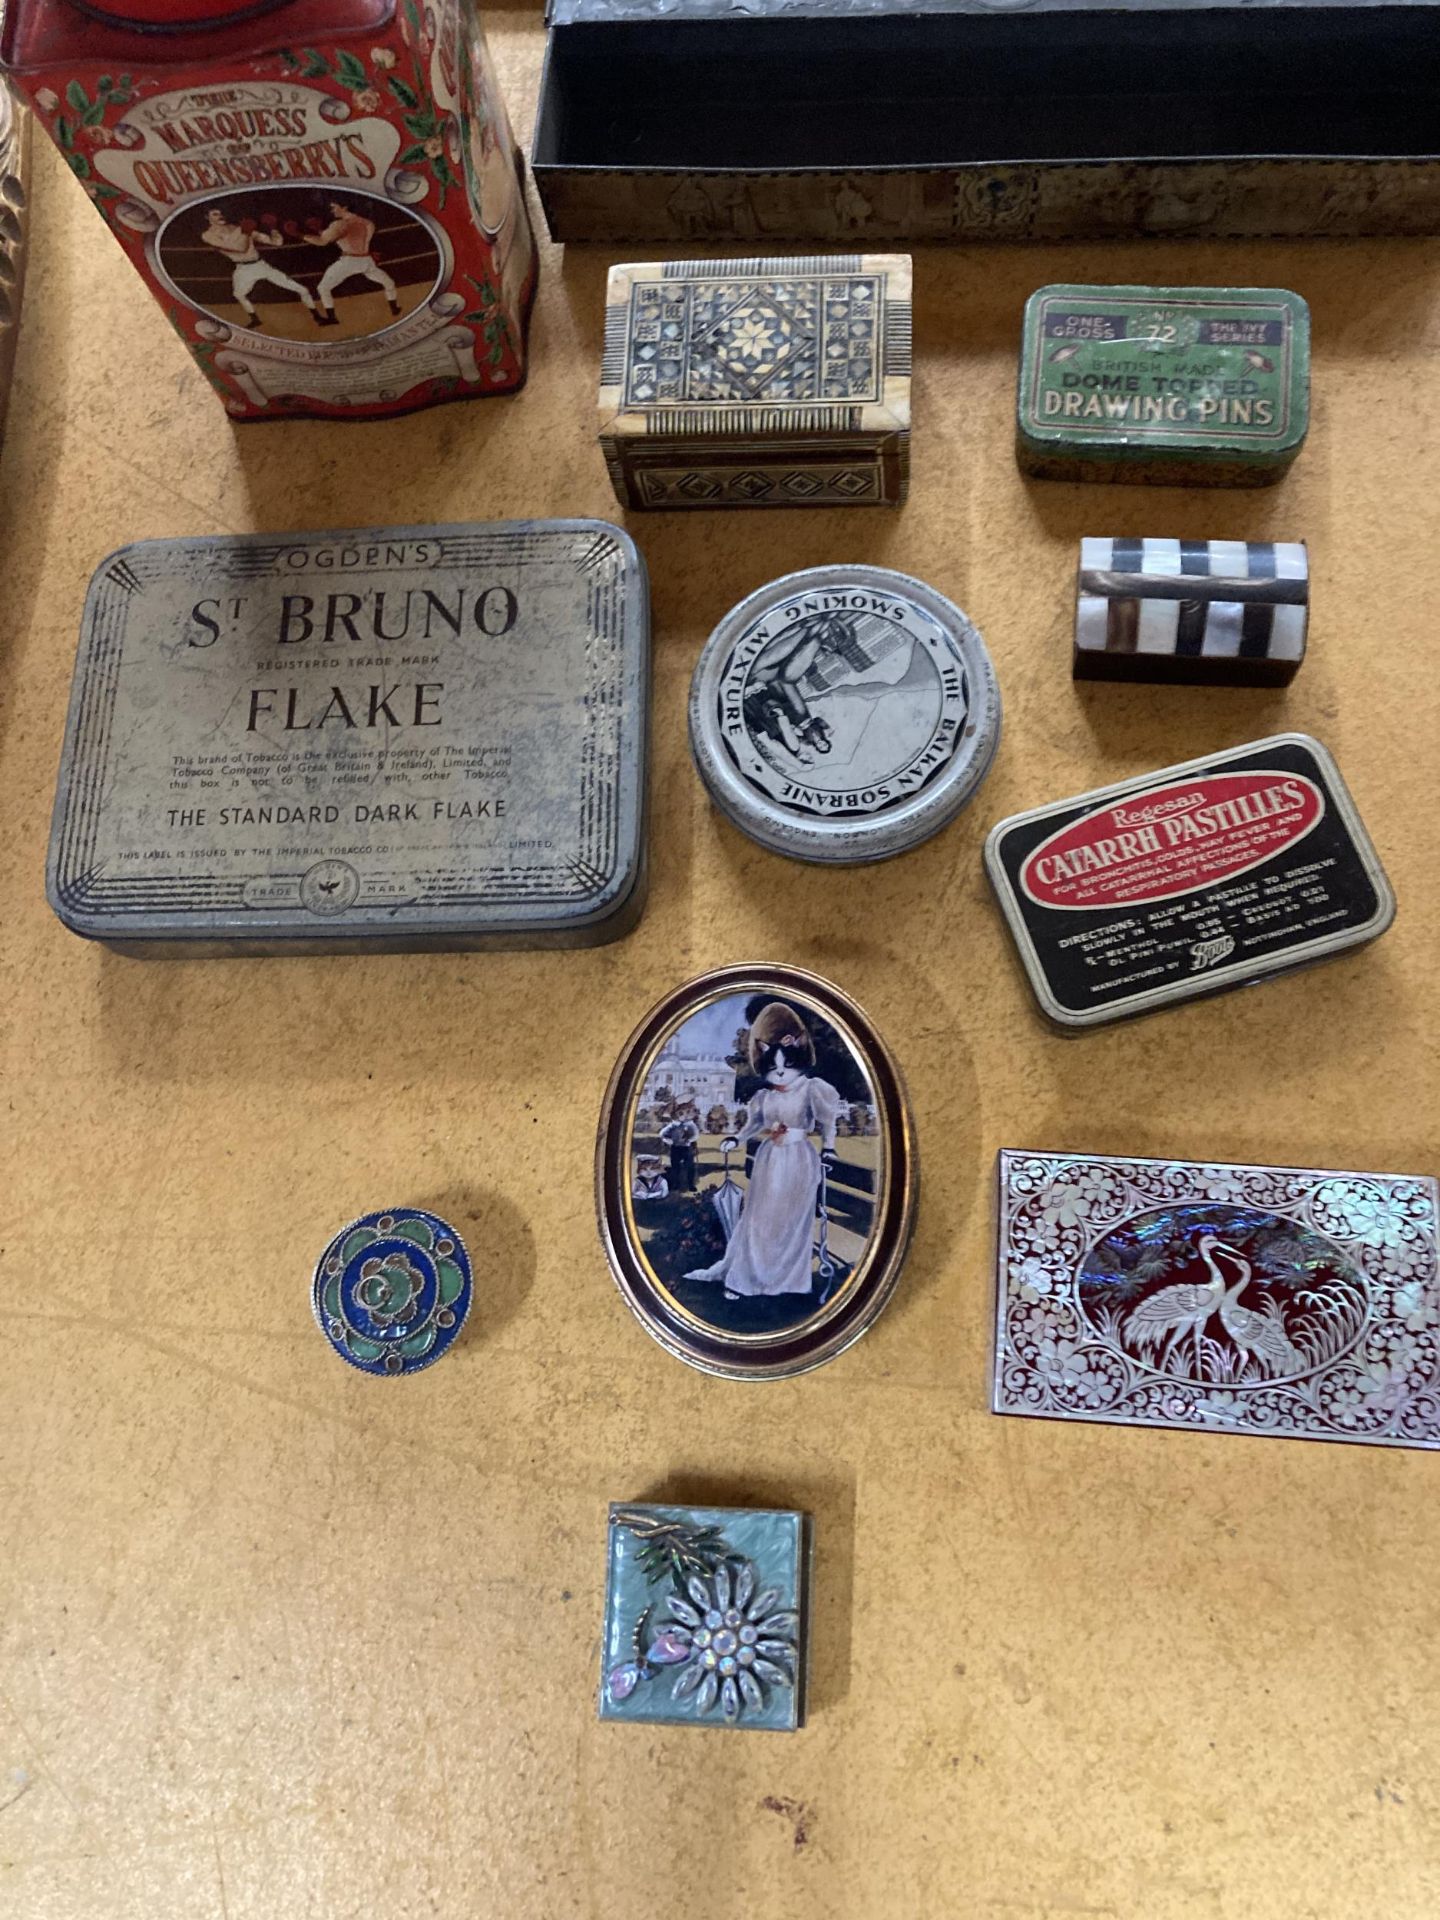 A COLLECTION OF VINTAGE TINS AND BOXES TO INCLUDE MOTHER OF PEARL, ROWNTREE, OGDEN'S ST BRUNO, ETC - Image 2 of 4